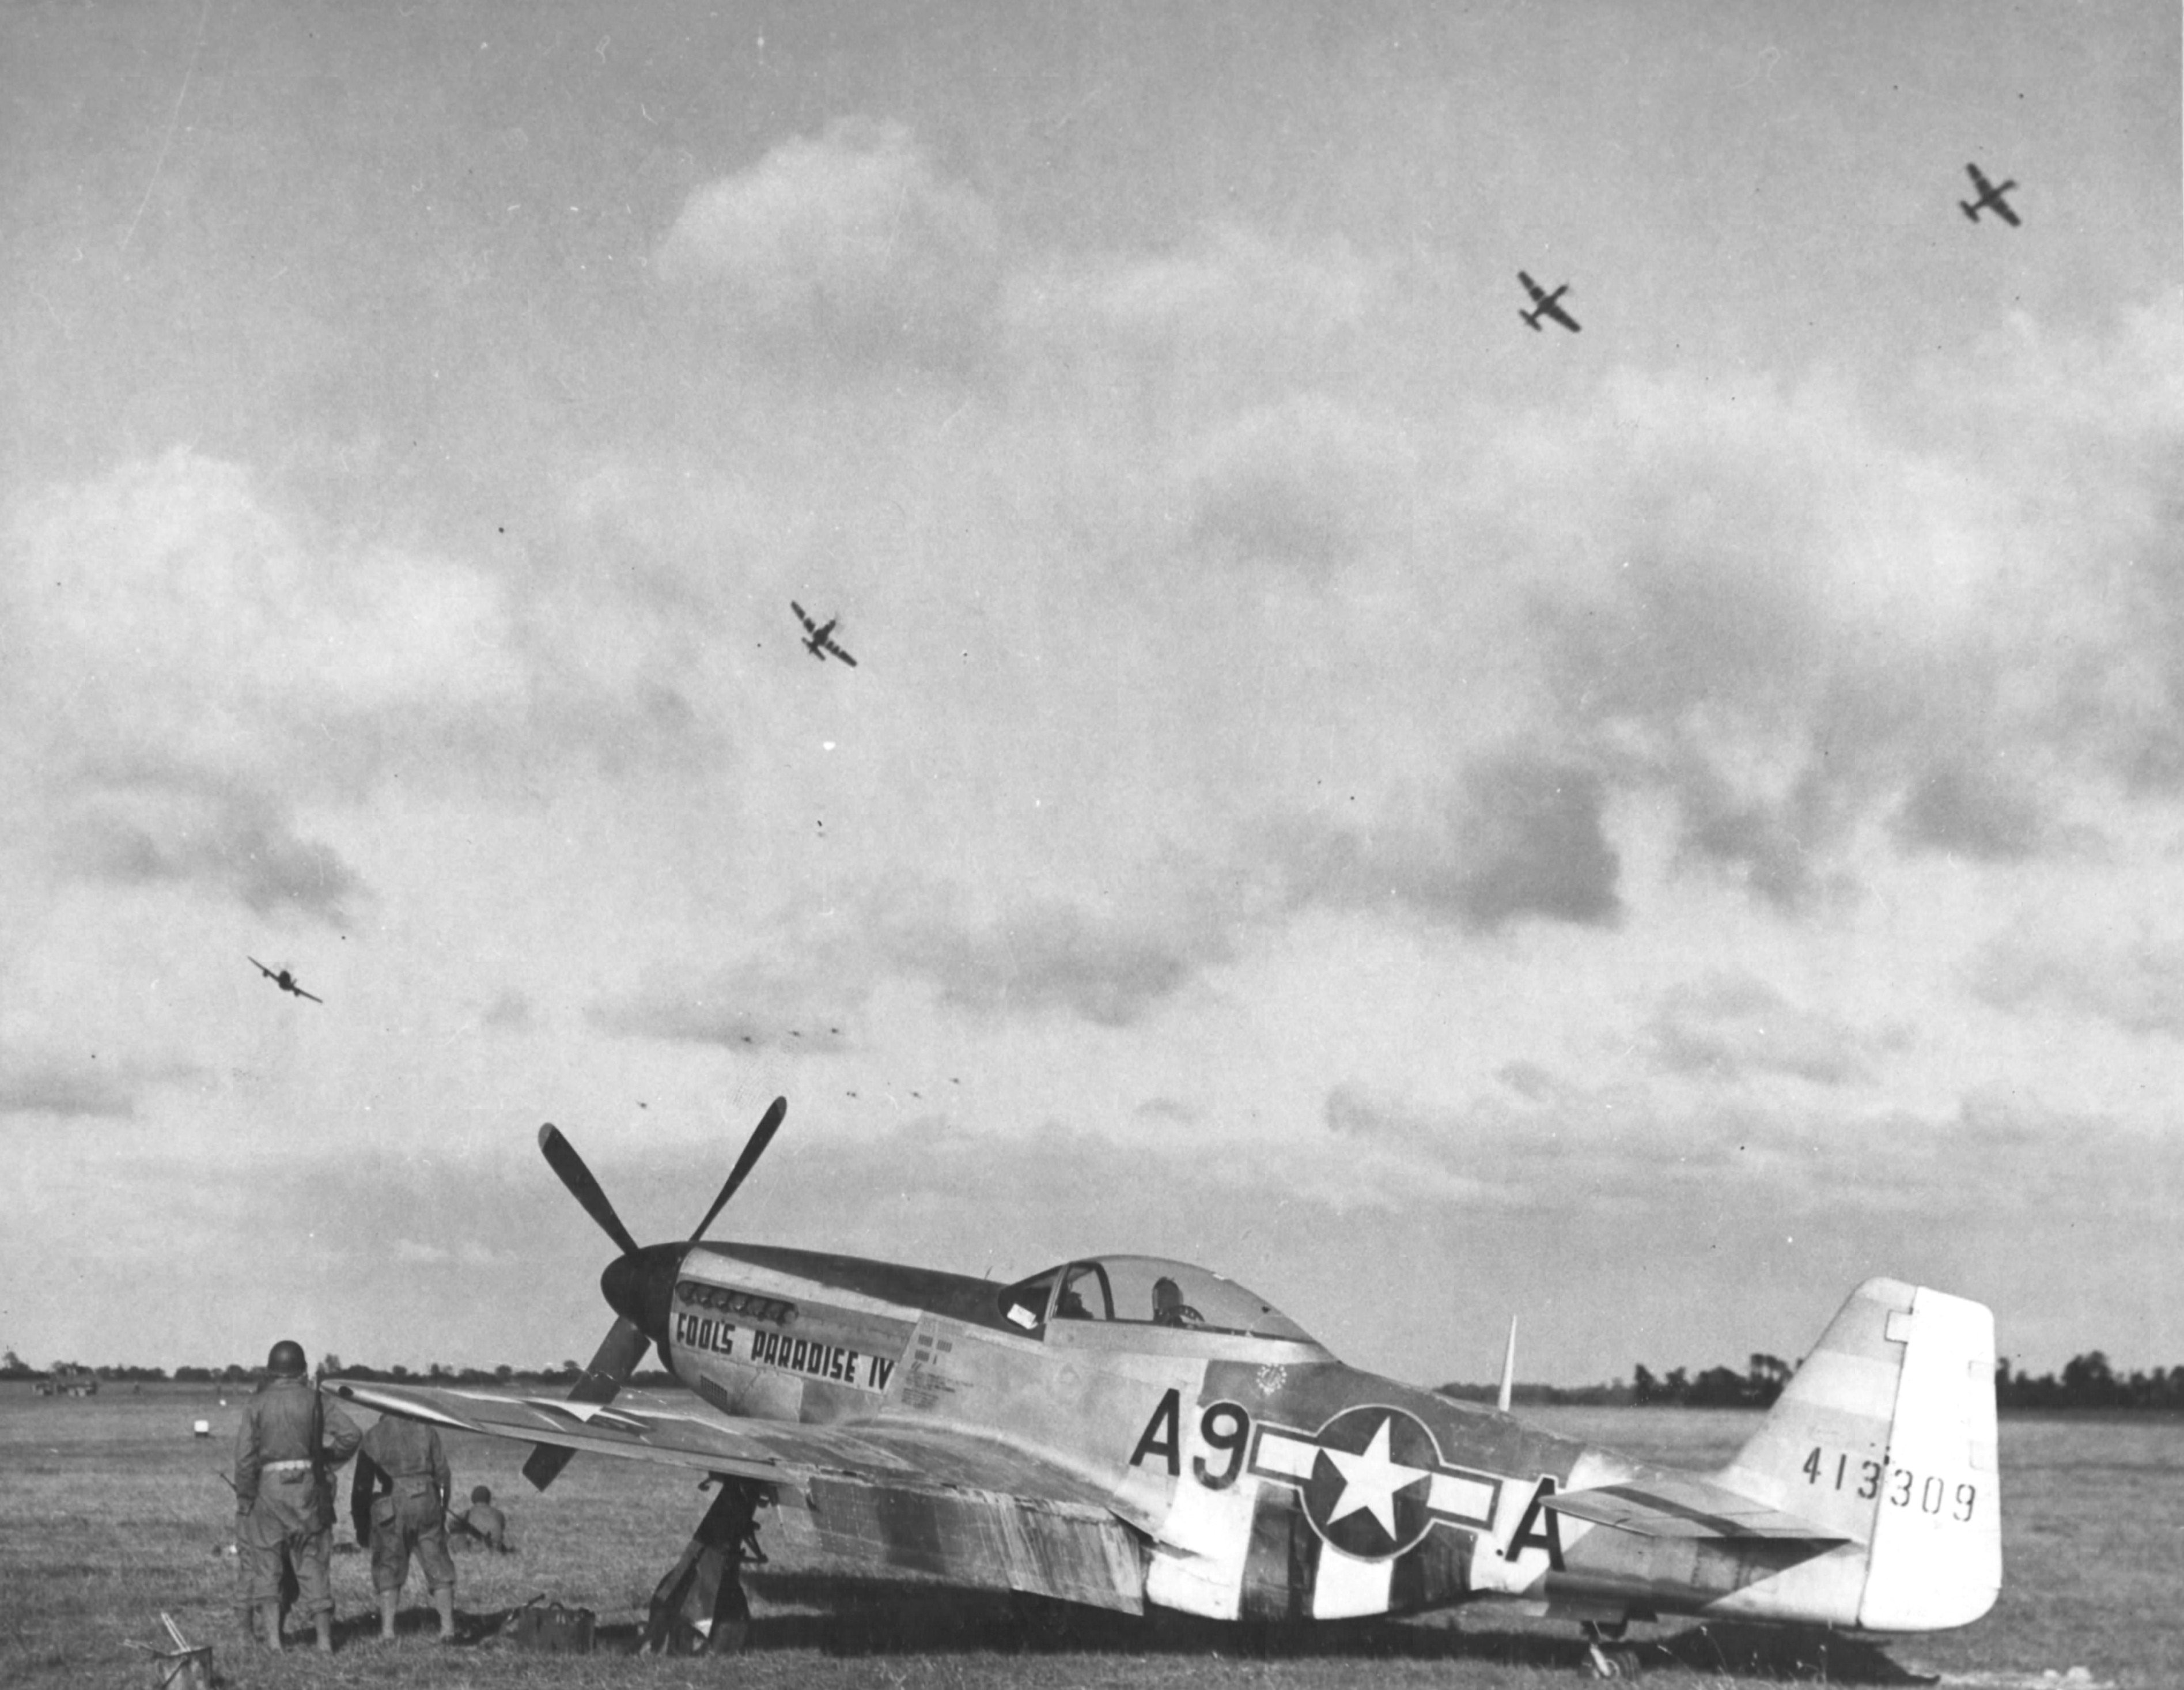 P-51D Mustang 'Fools Paradise IV' fighter of 363rd Fighter Group, US 380th Fighter Squadron at Maupertus Airfield near Cherbourg, Normandy, France, Jul 4-12 1944.